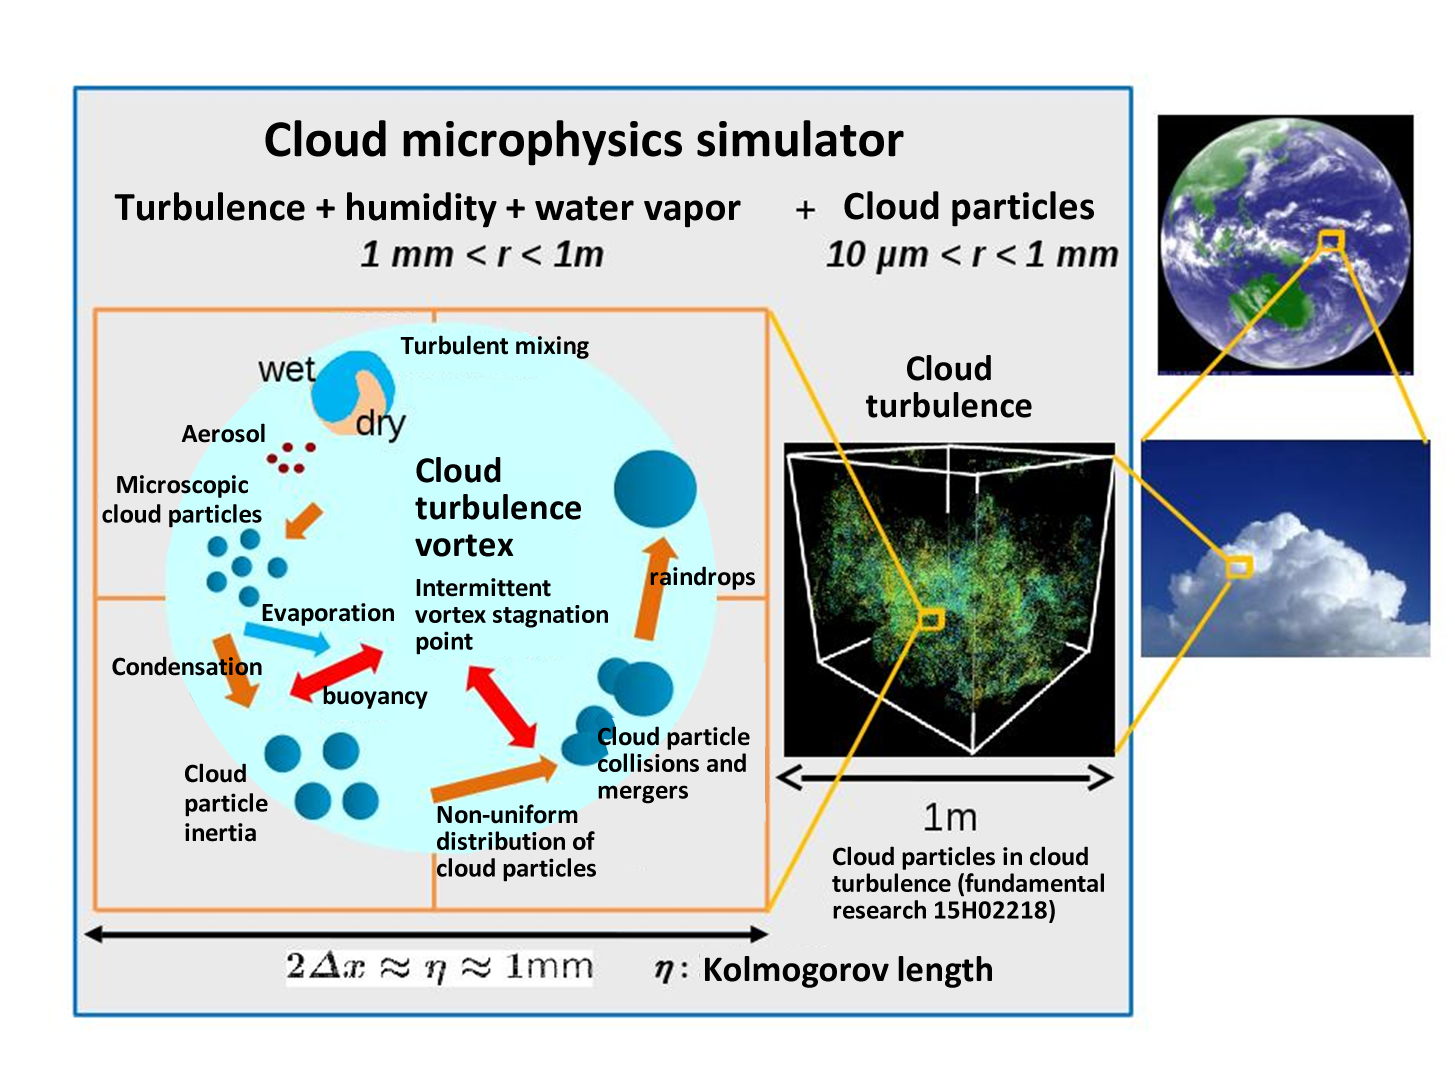 Various phenomena that occur inside clouds and a conceptual diagram of a cloud microphysics simulator